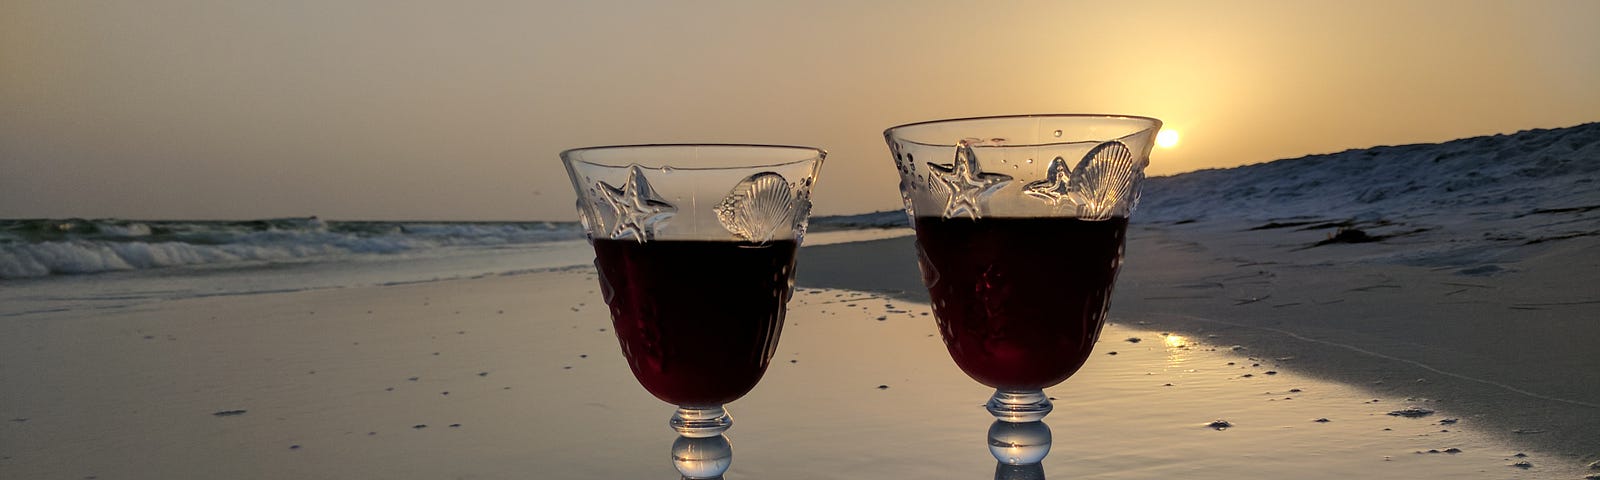 Two wine glasses half-filled with wine perched upon the shoreline of a beach at sunset.